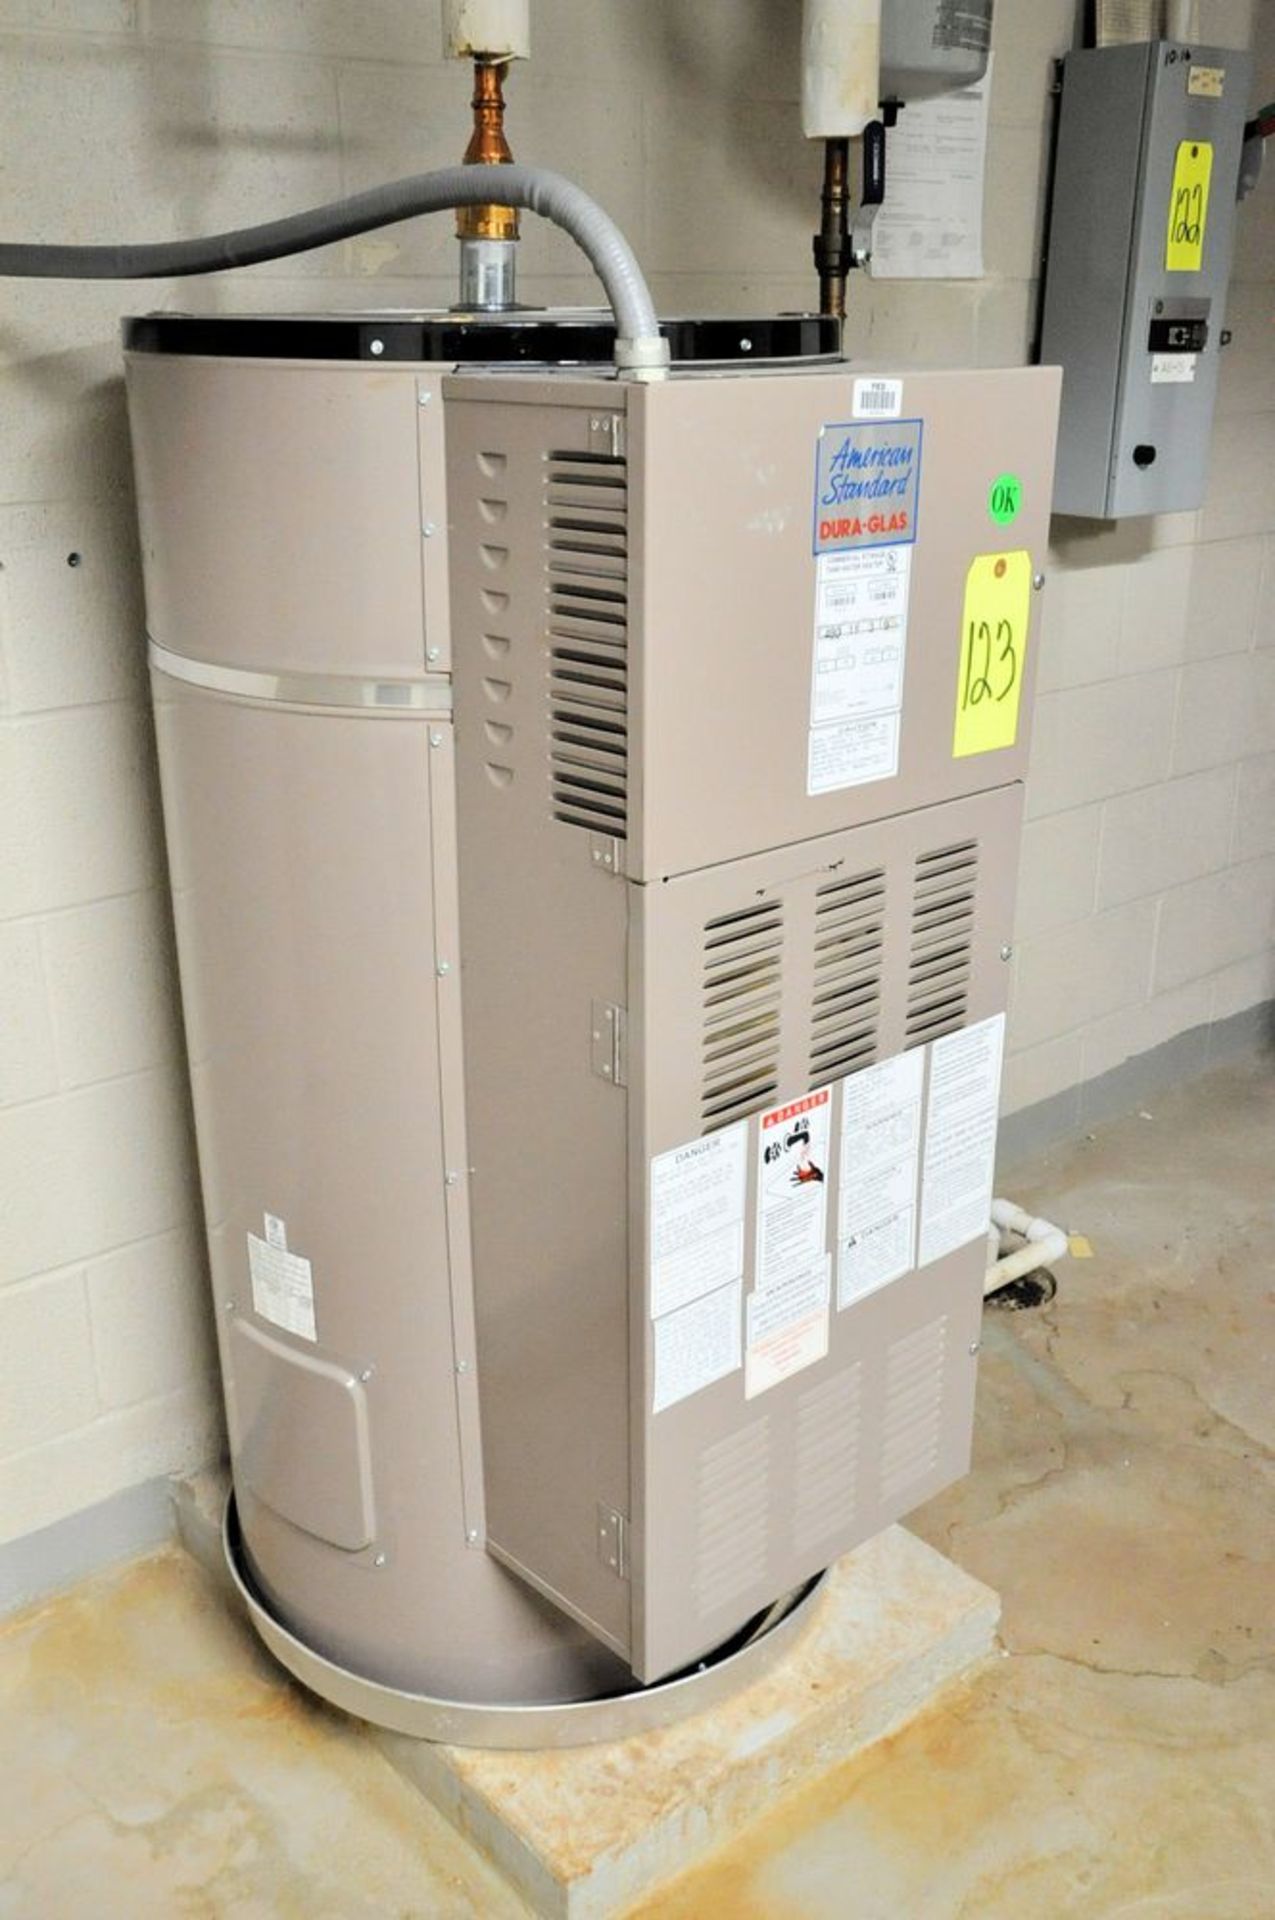 American Standard Dura-Glas Model CE-52 AS, Electric Hot Water Heater, S/n C12-0918, (Mechanical - Image 2 of 3